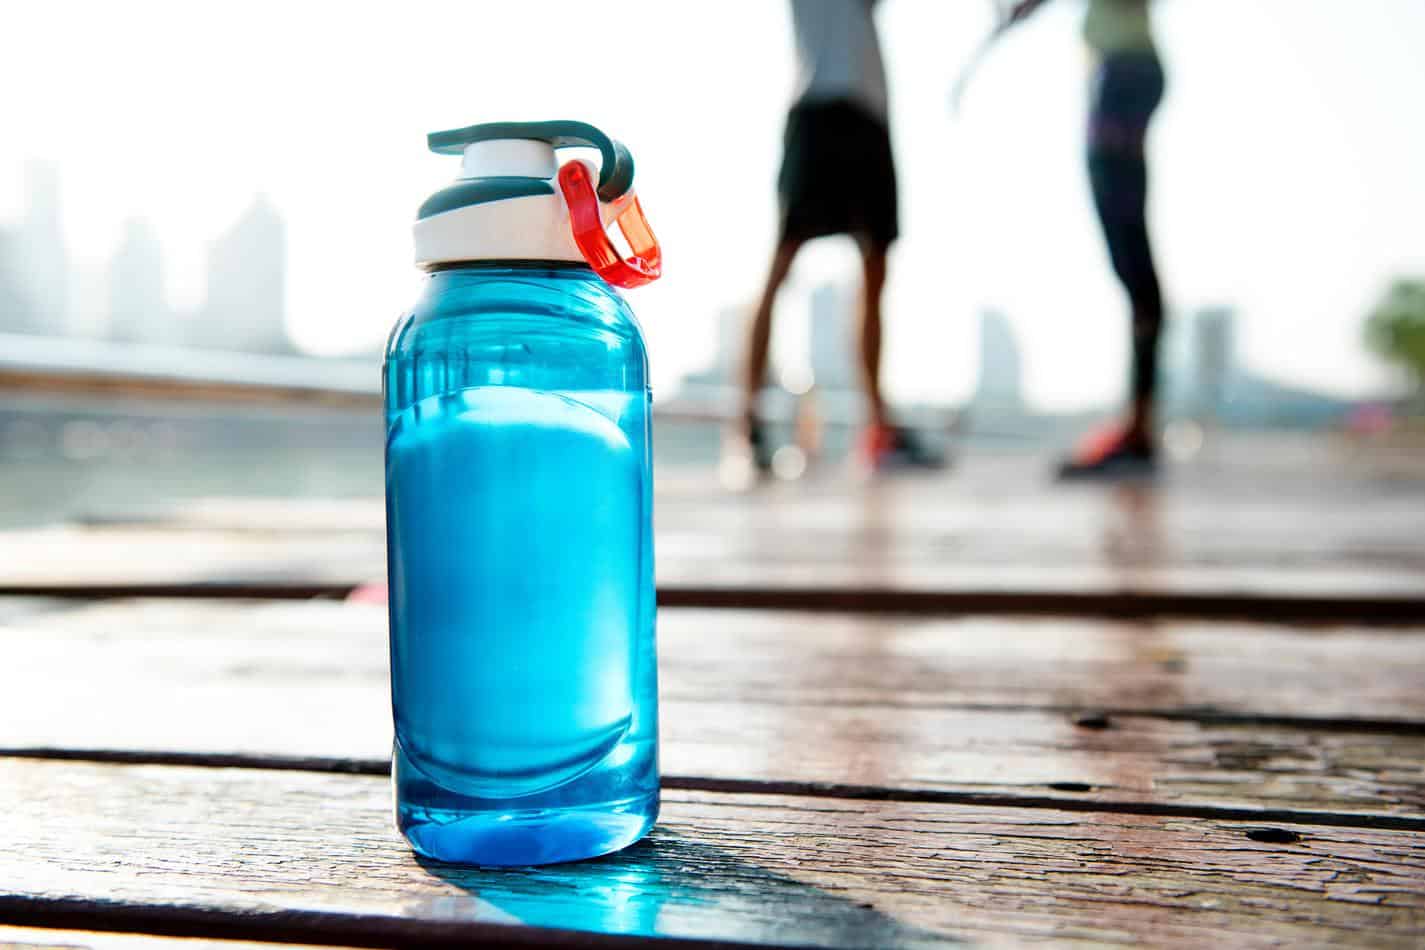 Carrying Your Own Water in a Marathon: The Good and the Bad